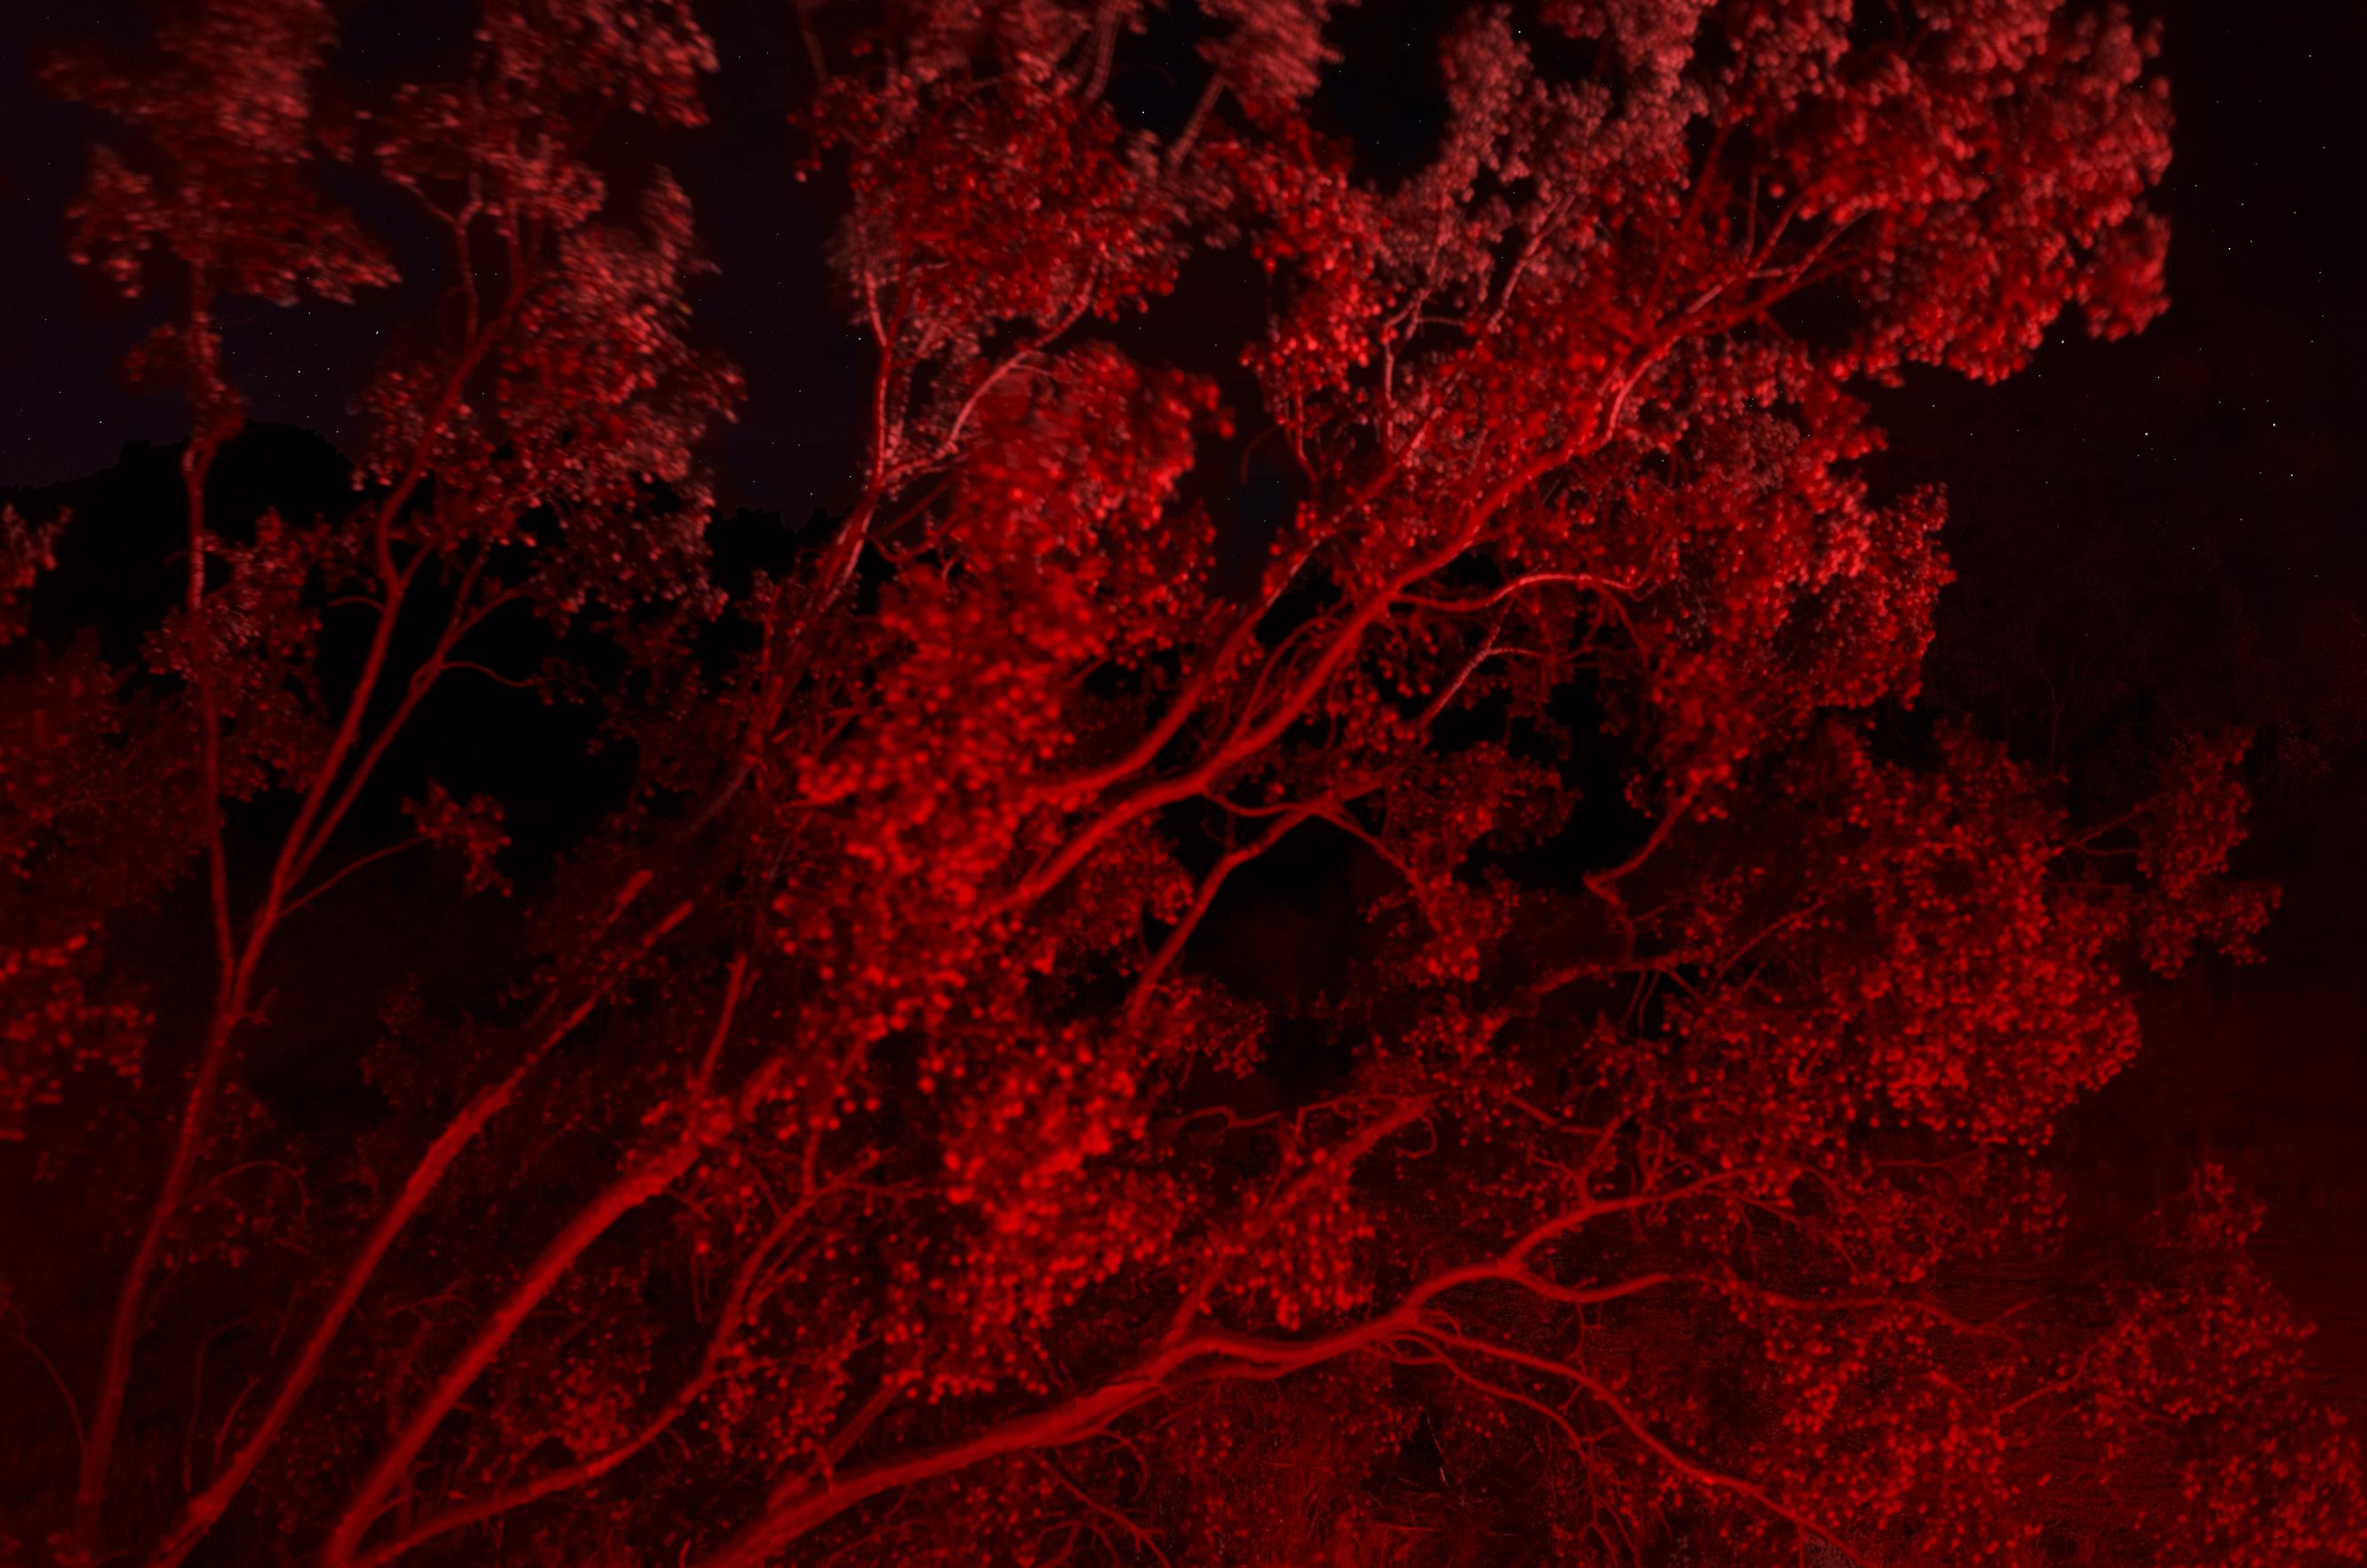 Ugne Pouwell Color Photograph - Red night - Red Monocolor Night Photography, Joshua Tree National Park 